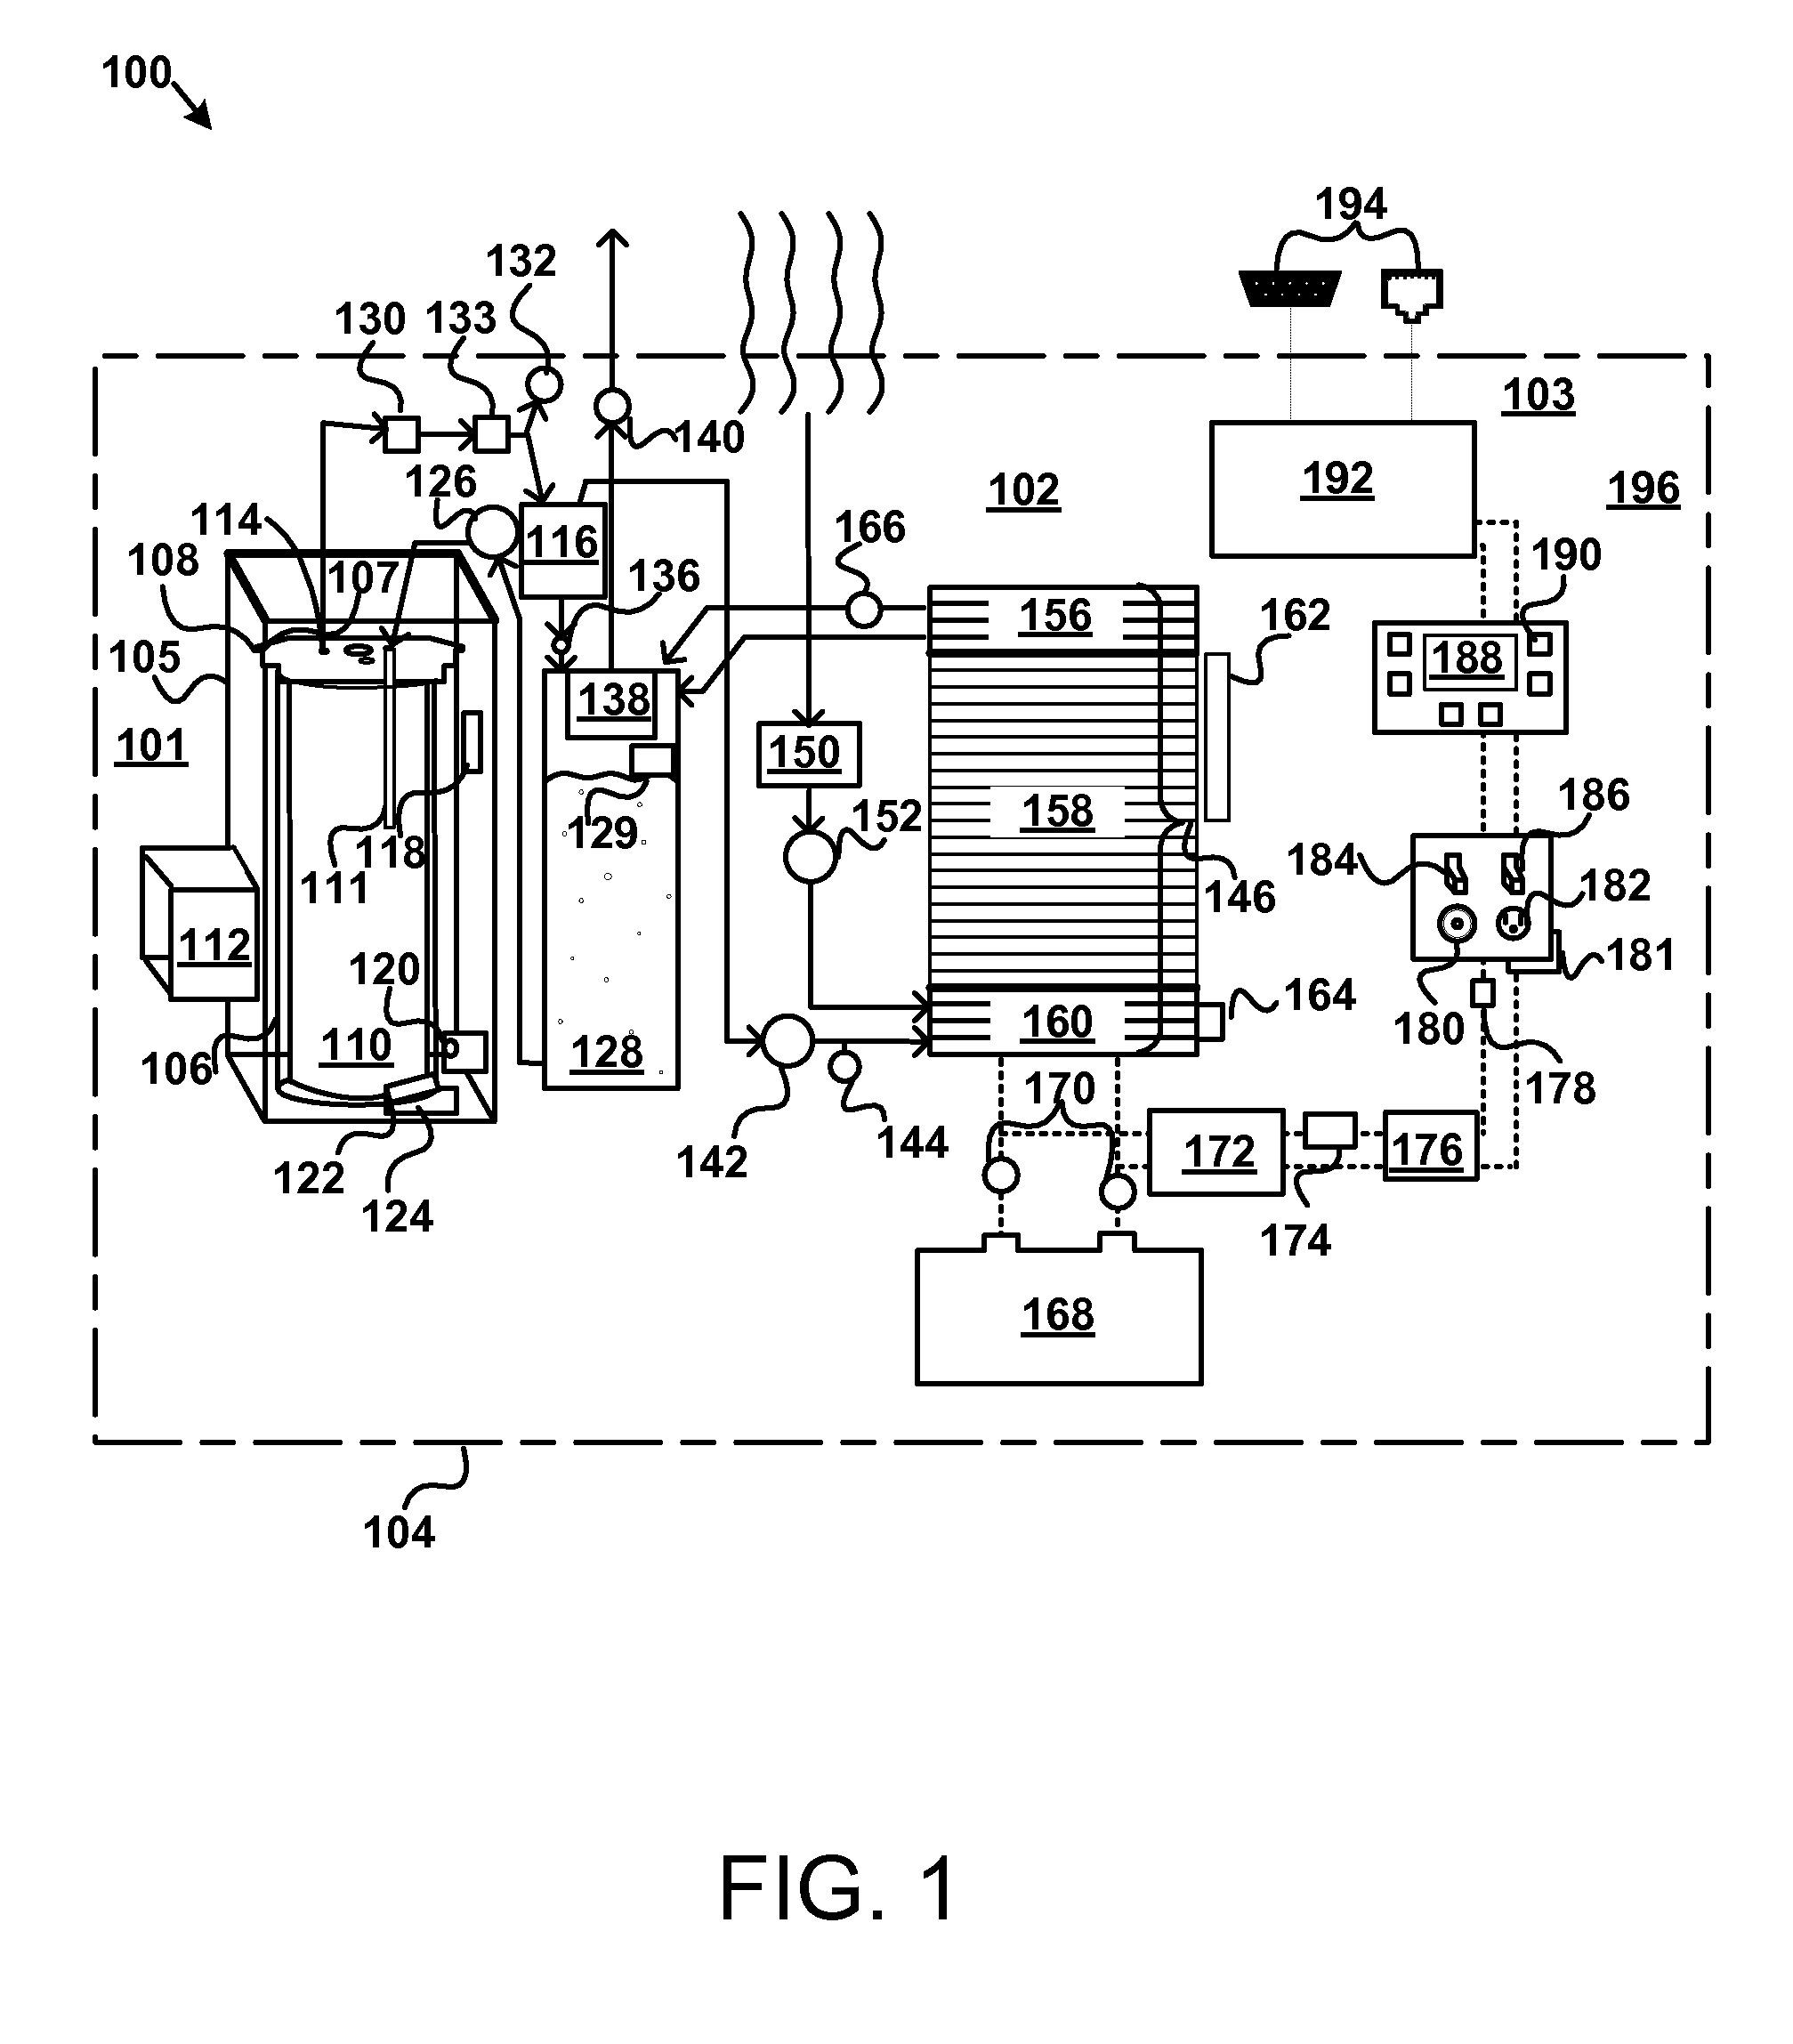 Apparatus, system, and method for processing hydrogen gas